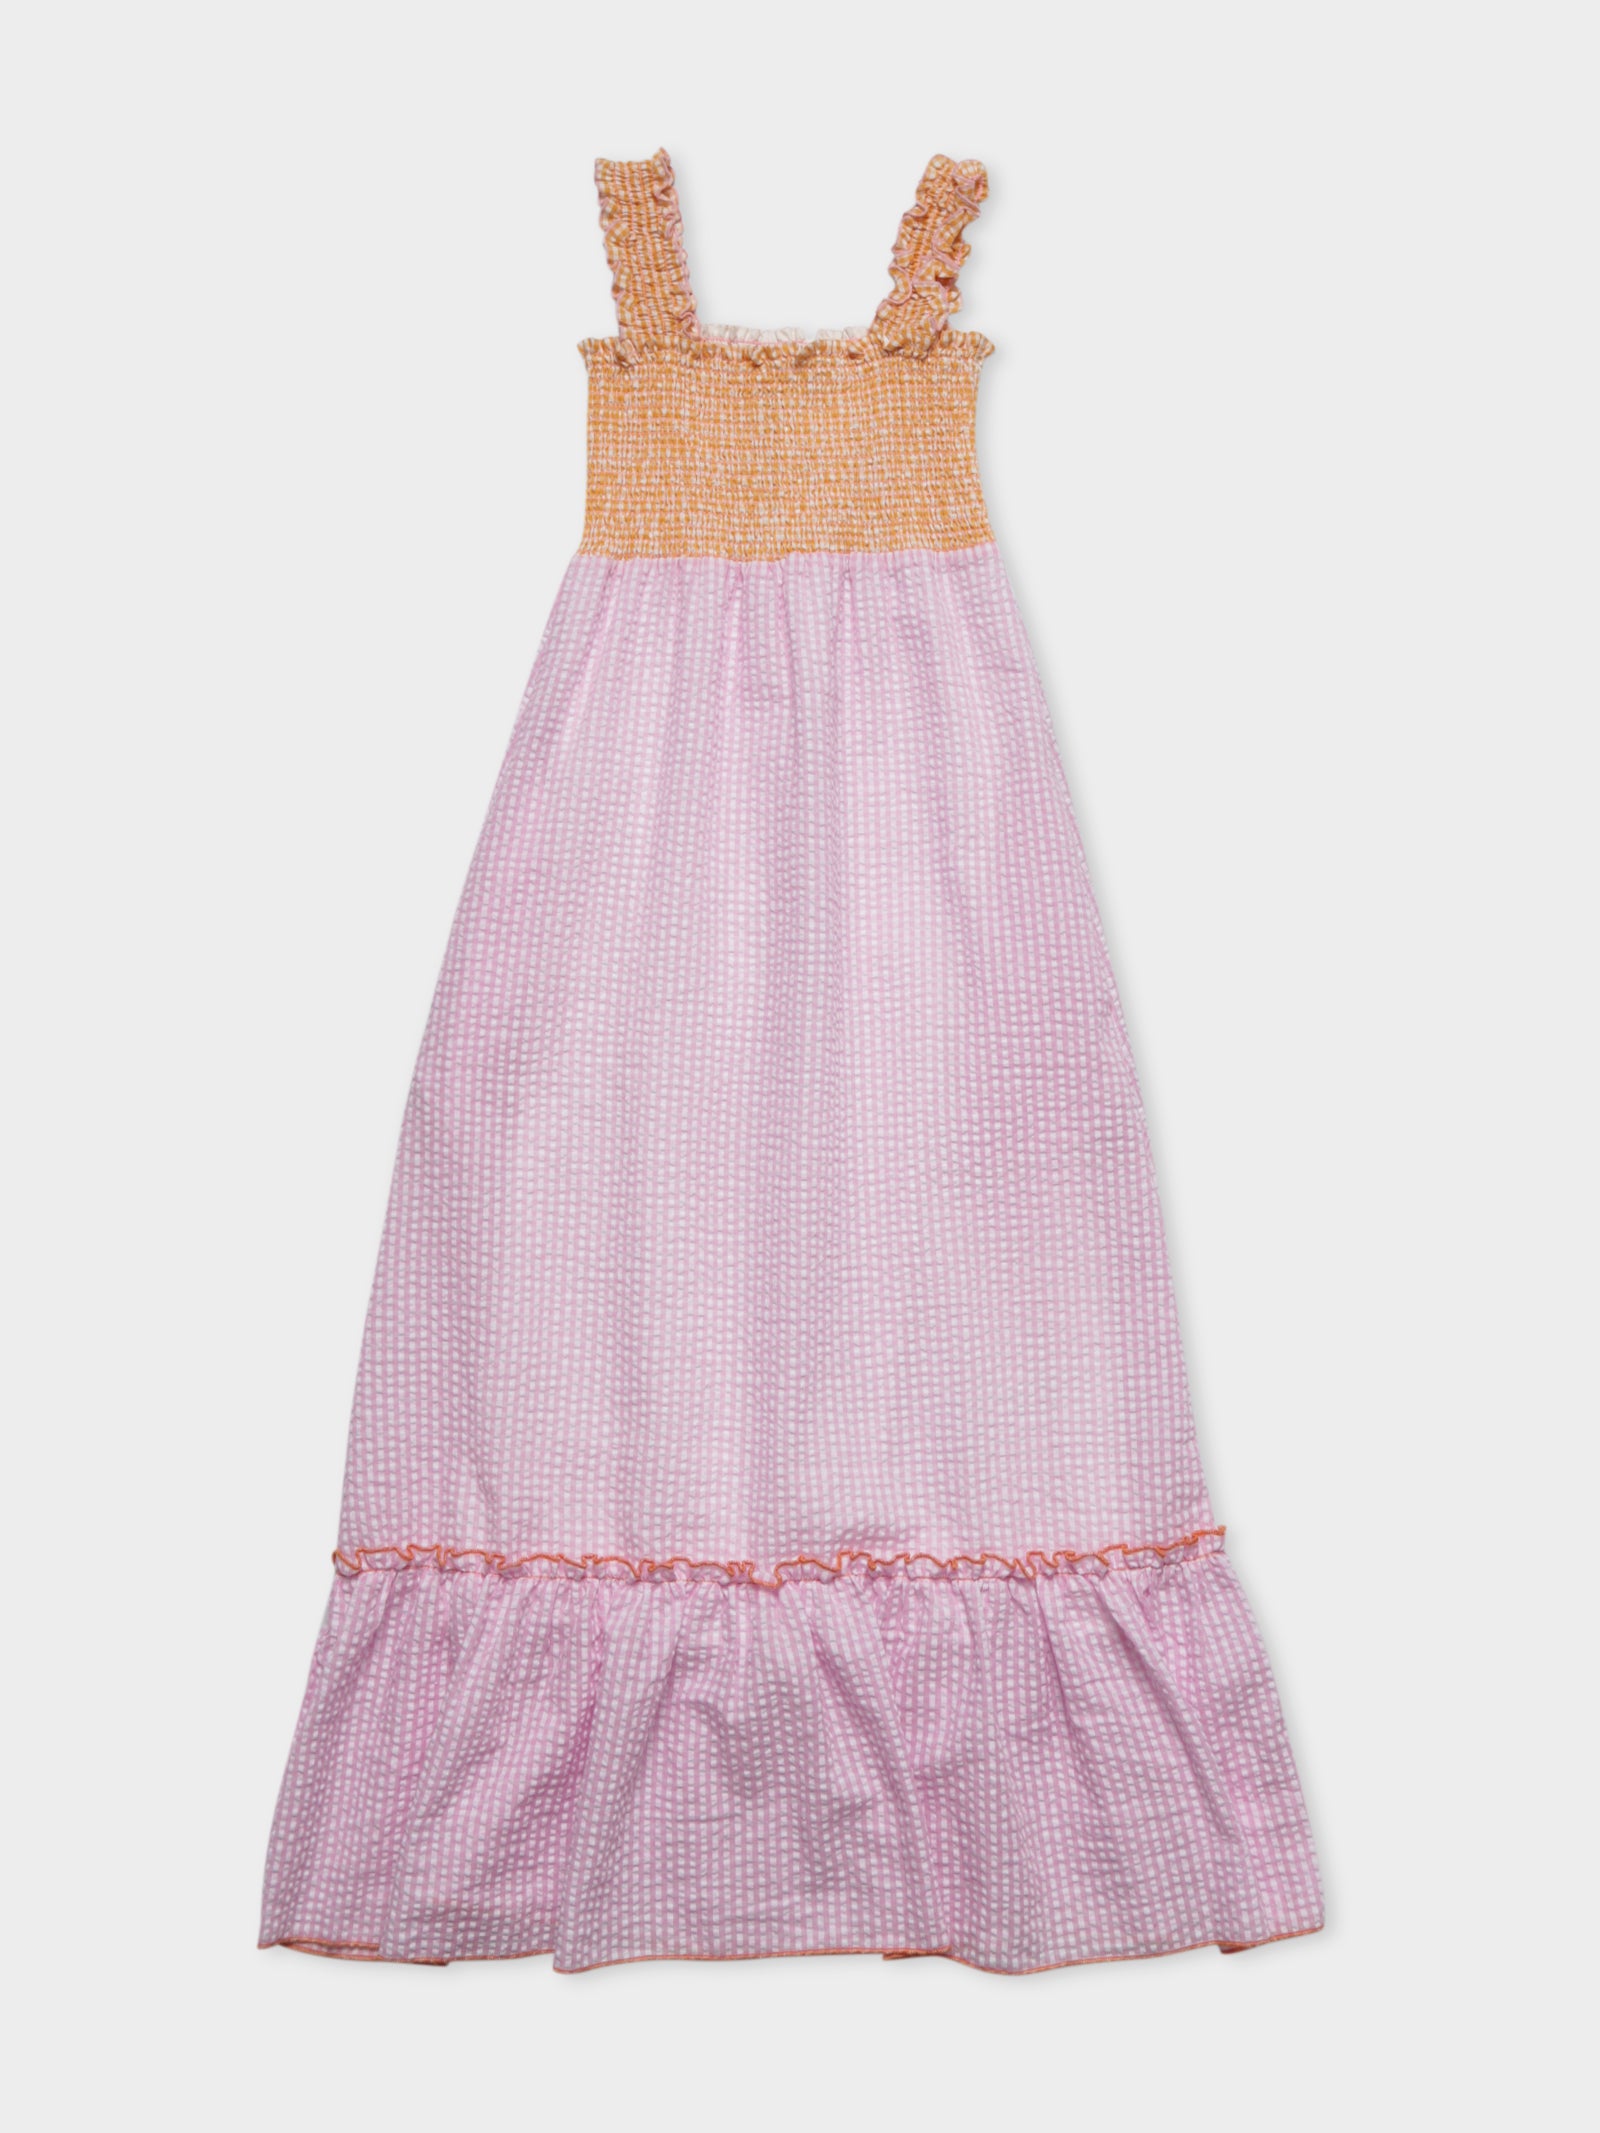 Clyde Dress in Mixed Gingham